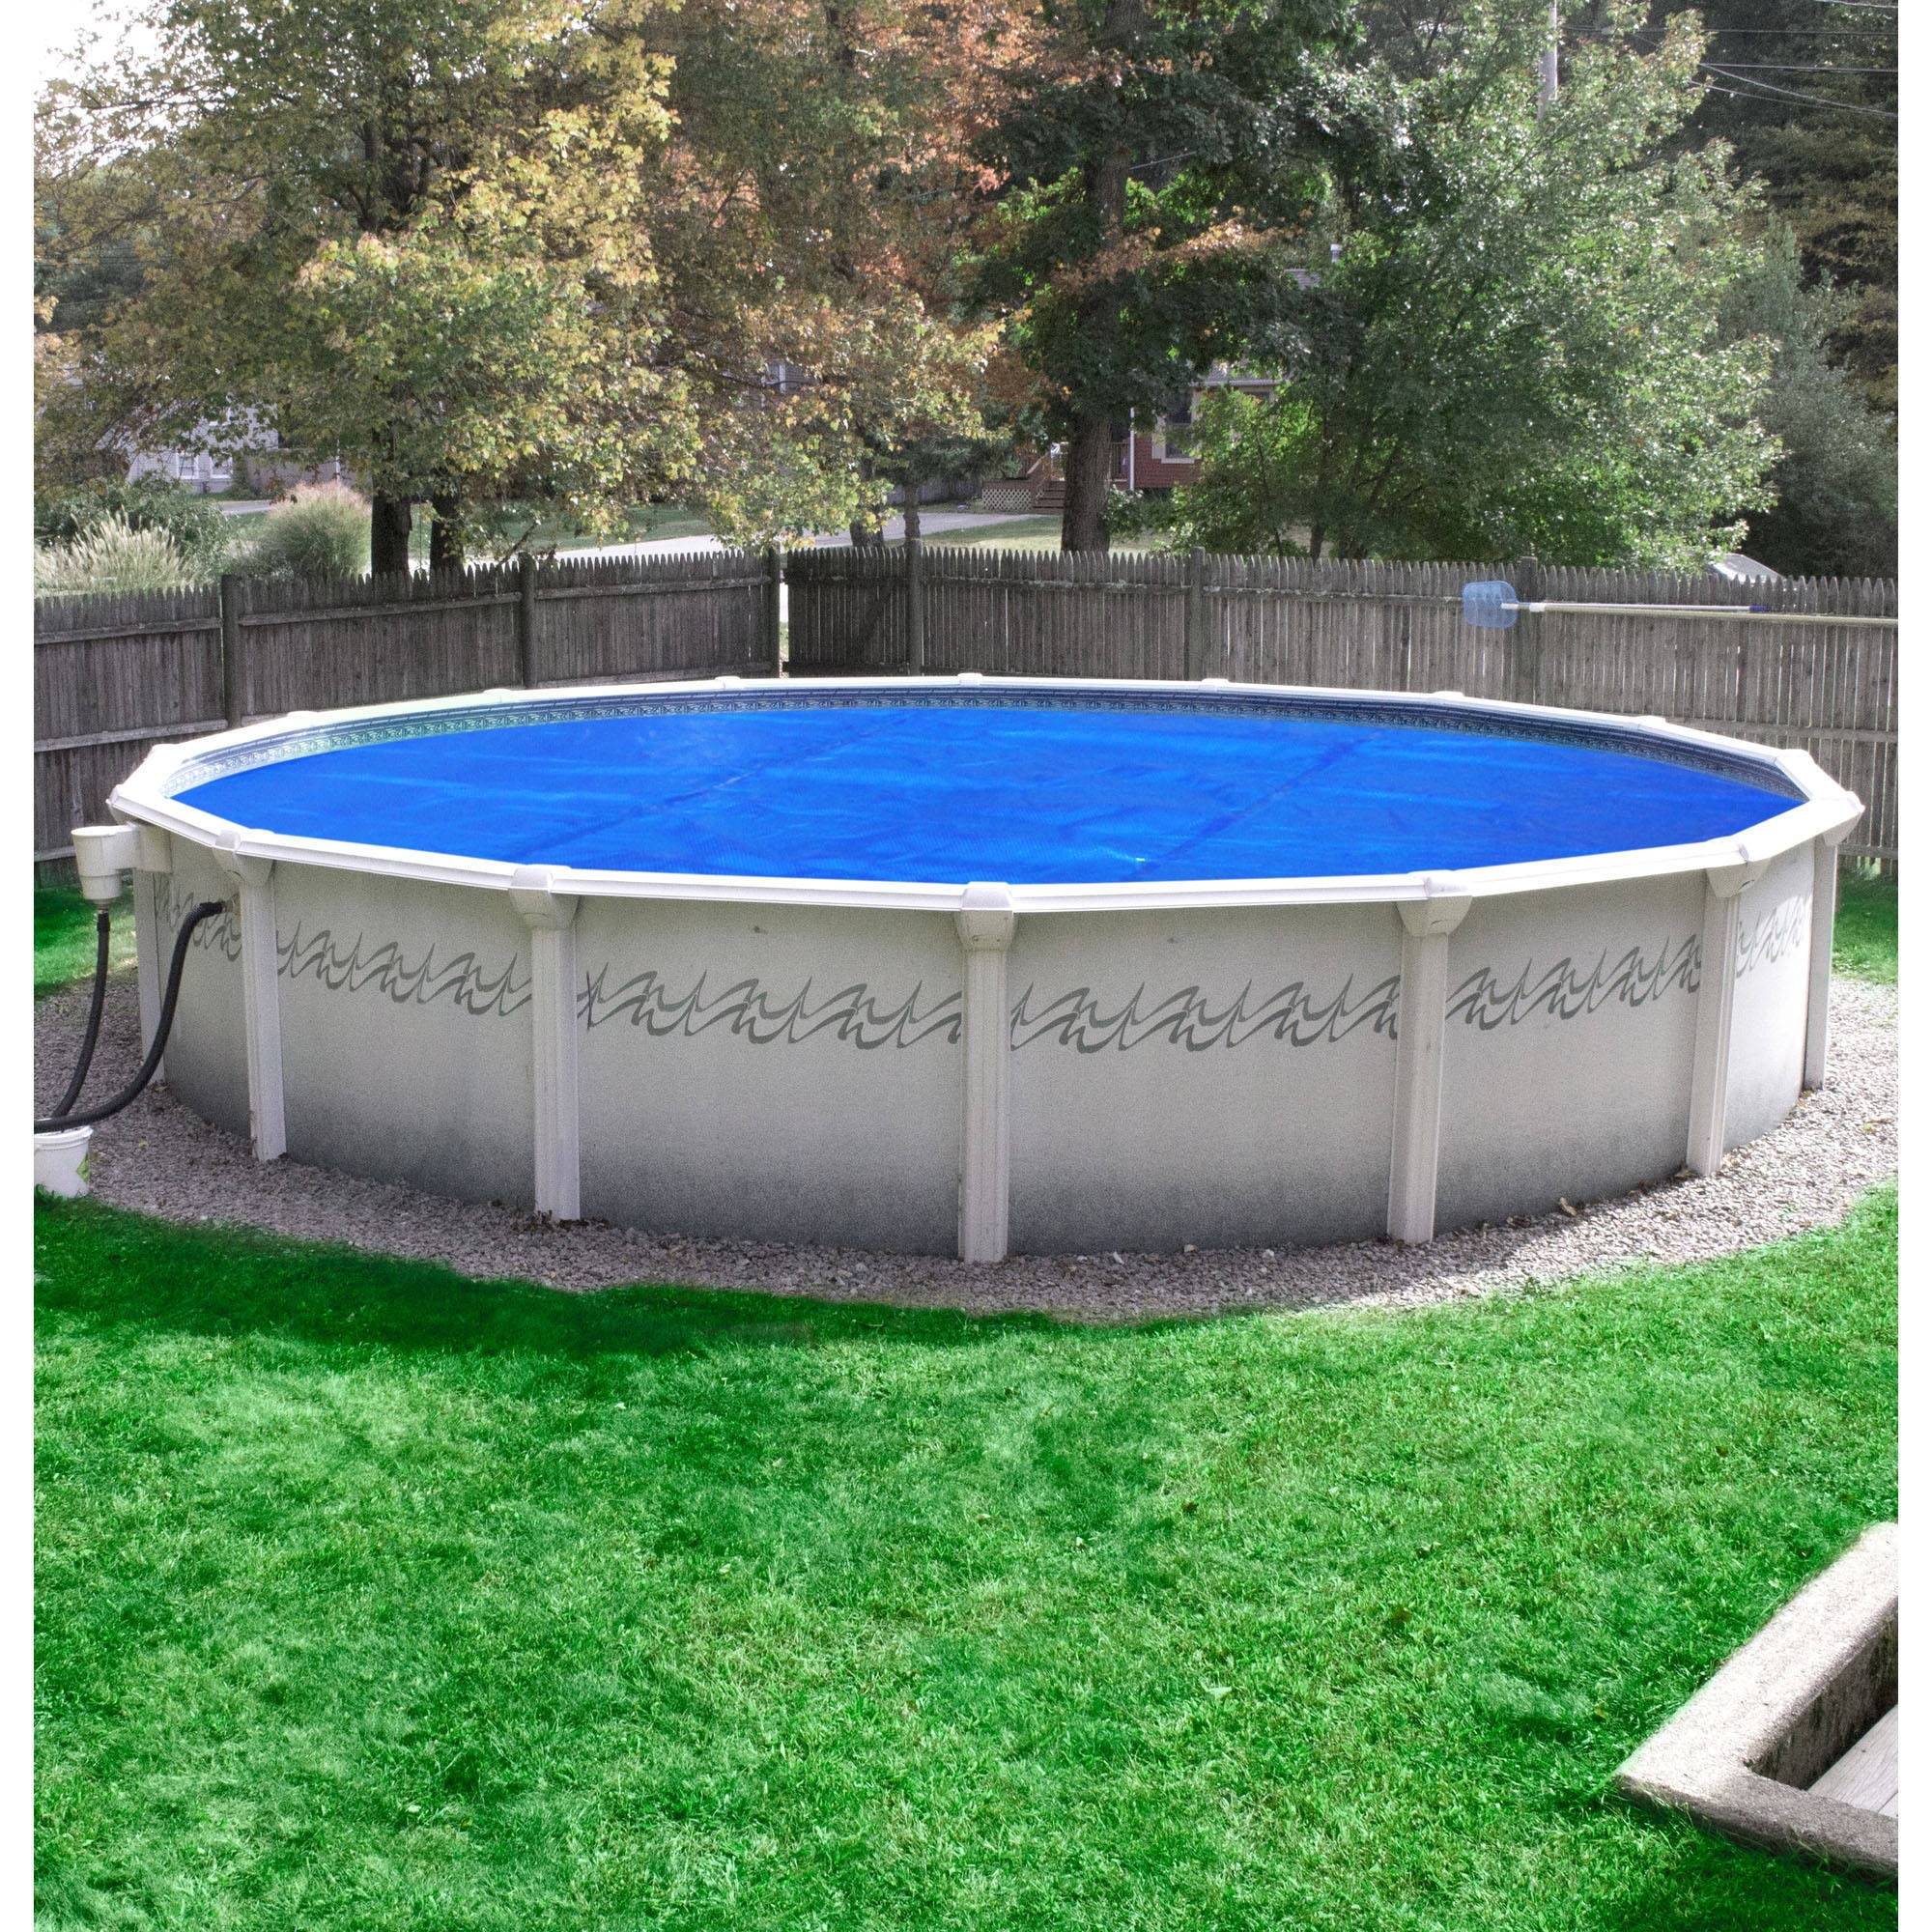 Robelle 3518-4 Super Winter Pool Cover for Round Above Ground Swimming Pools 18-ft Round Pool 